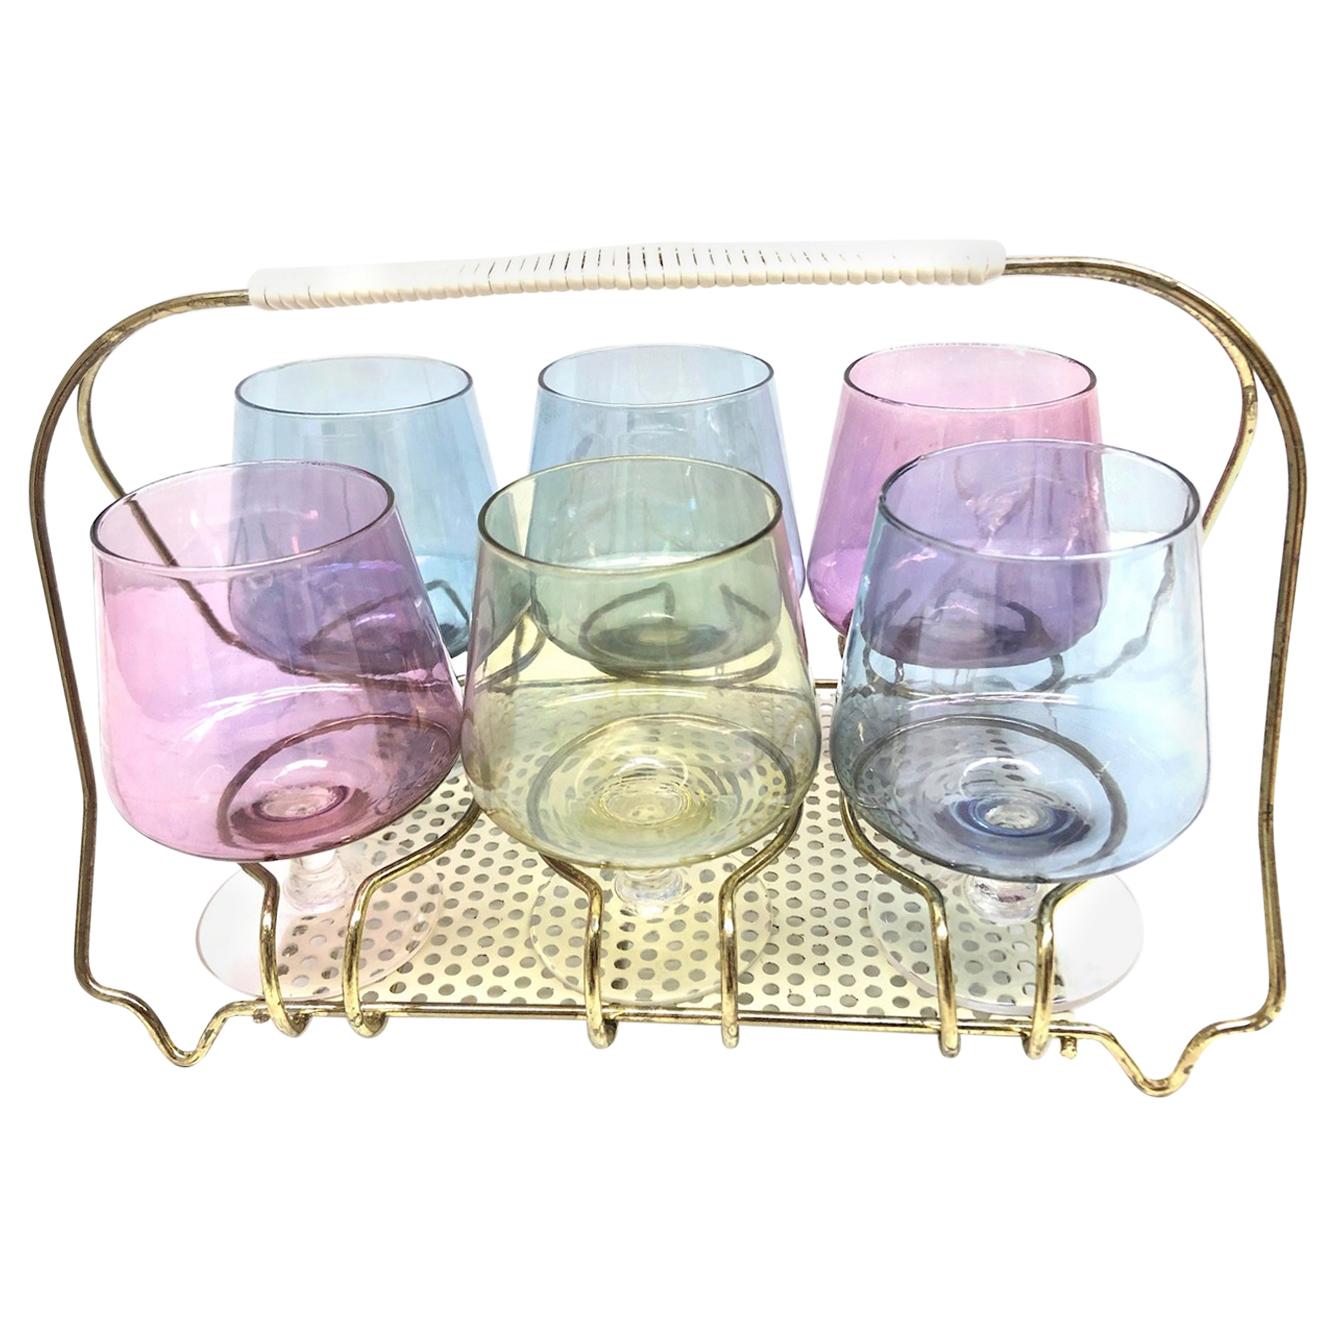 Six Barware Cognac Snifters Glasses on Mid-Century Modern String Wire Caddy